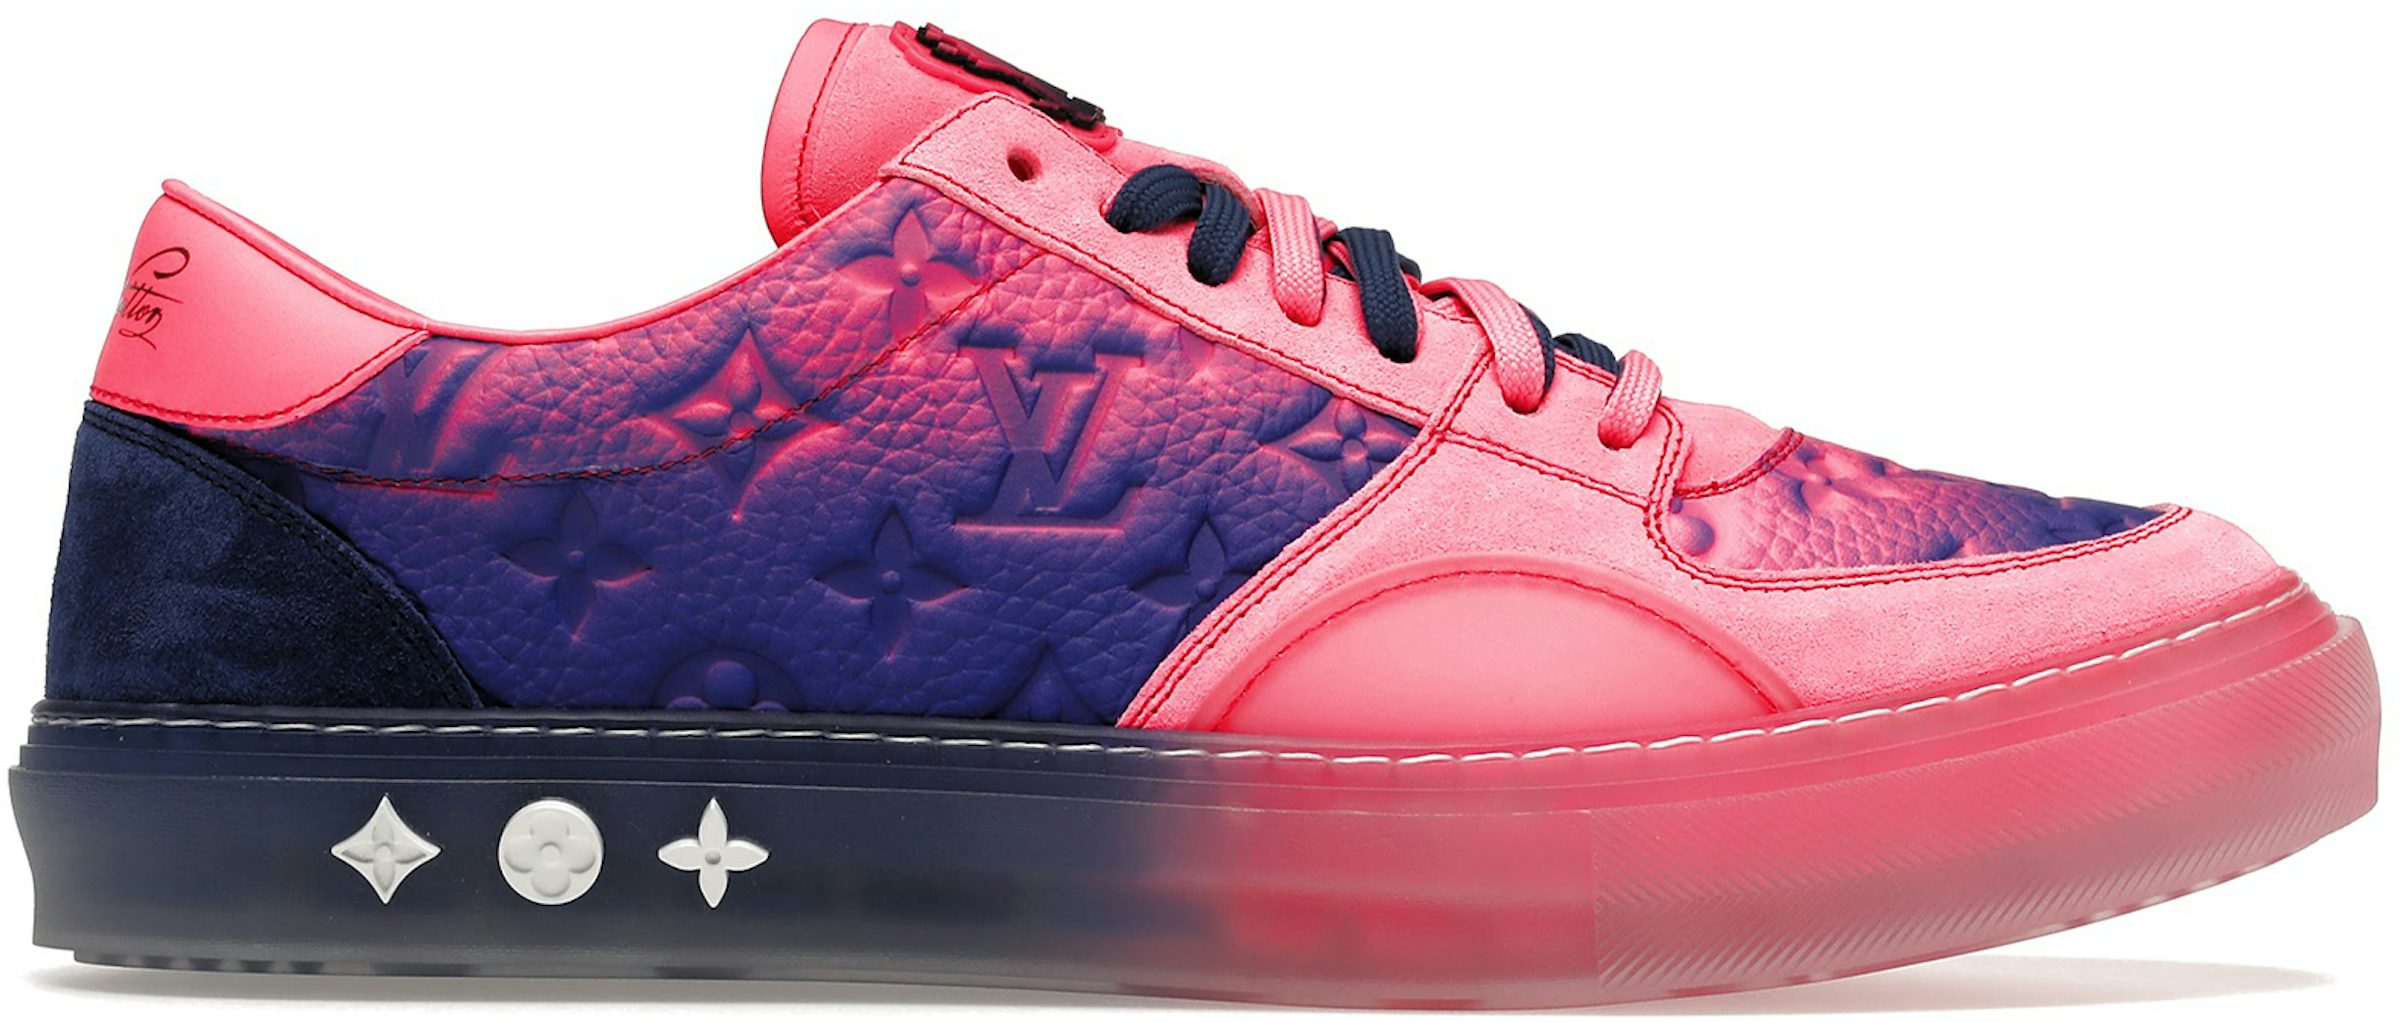 Check Out Louis Vuitton's New LVSK8 and High 8 Sneakers - Sneaker